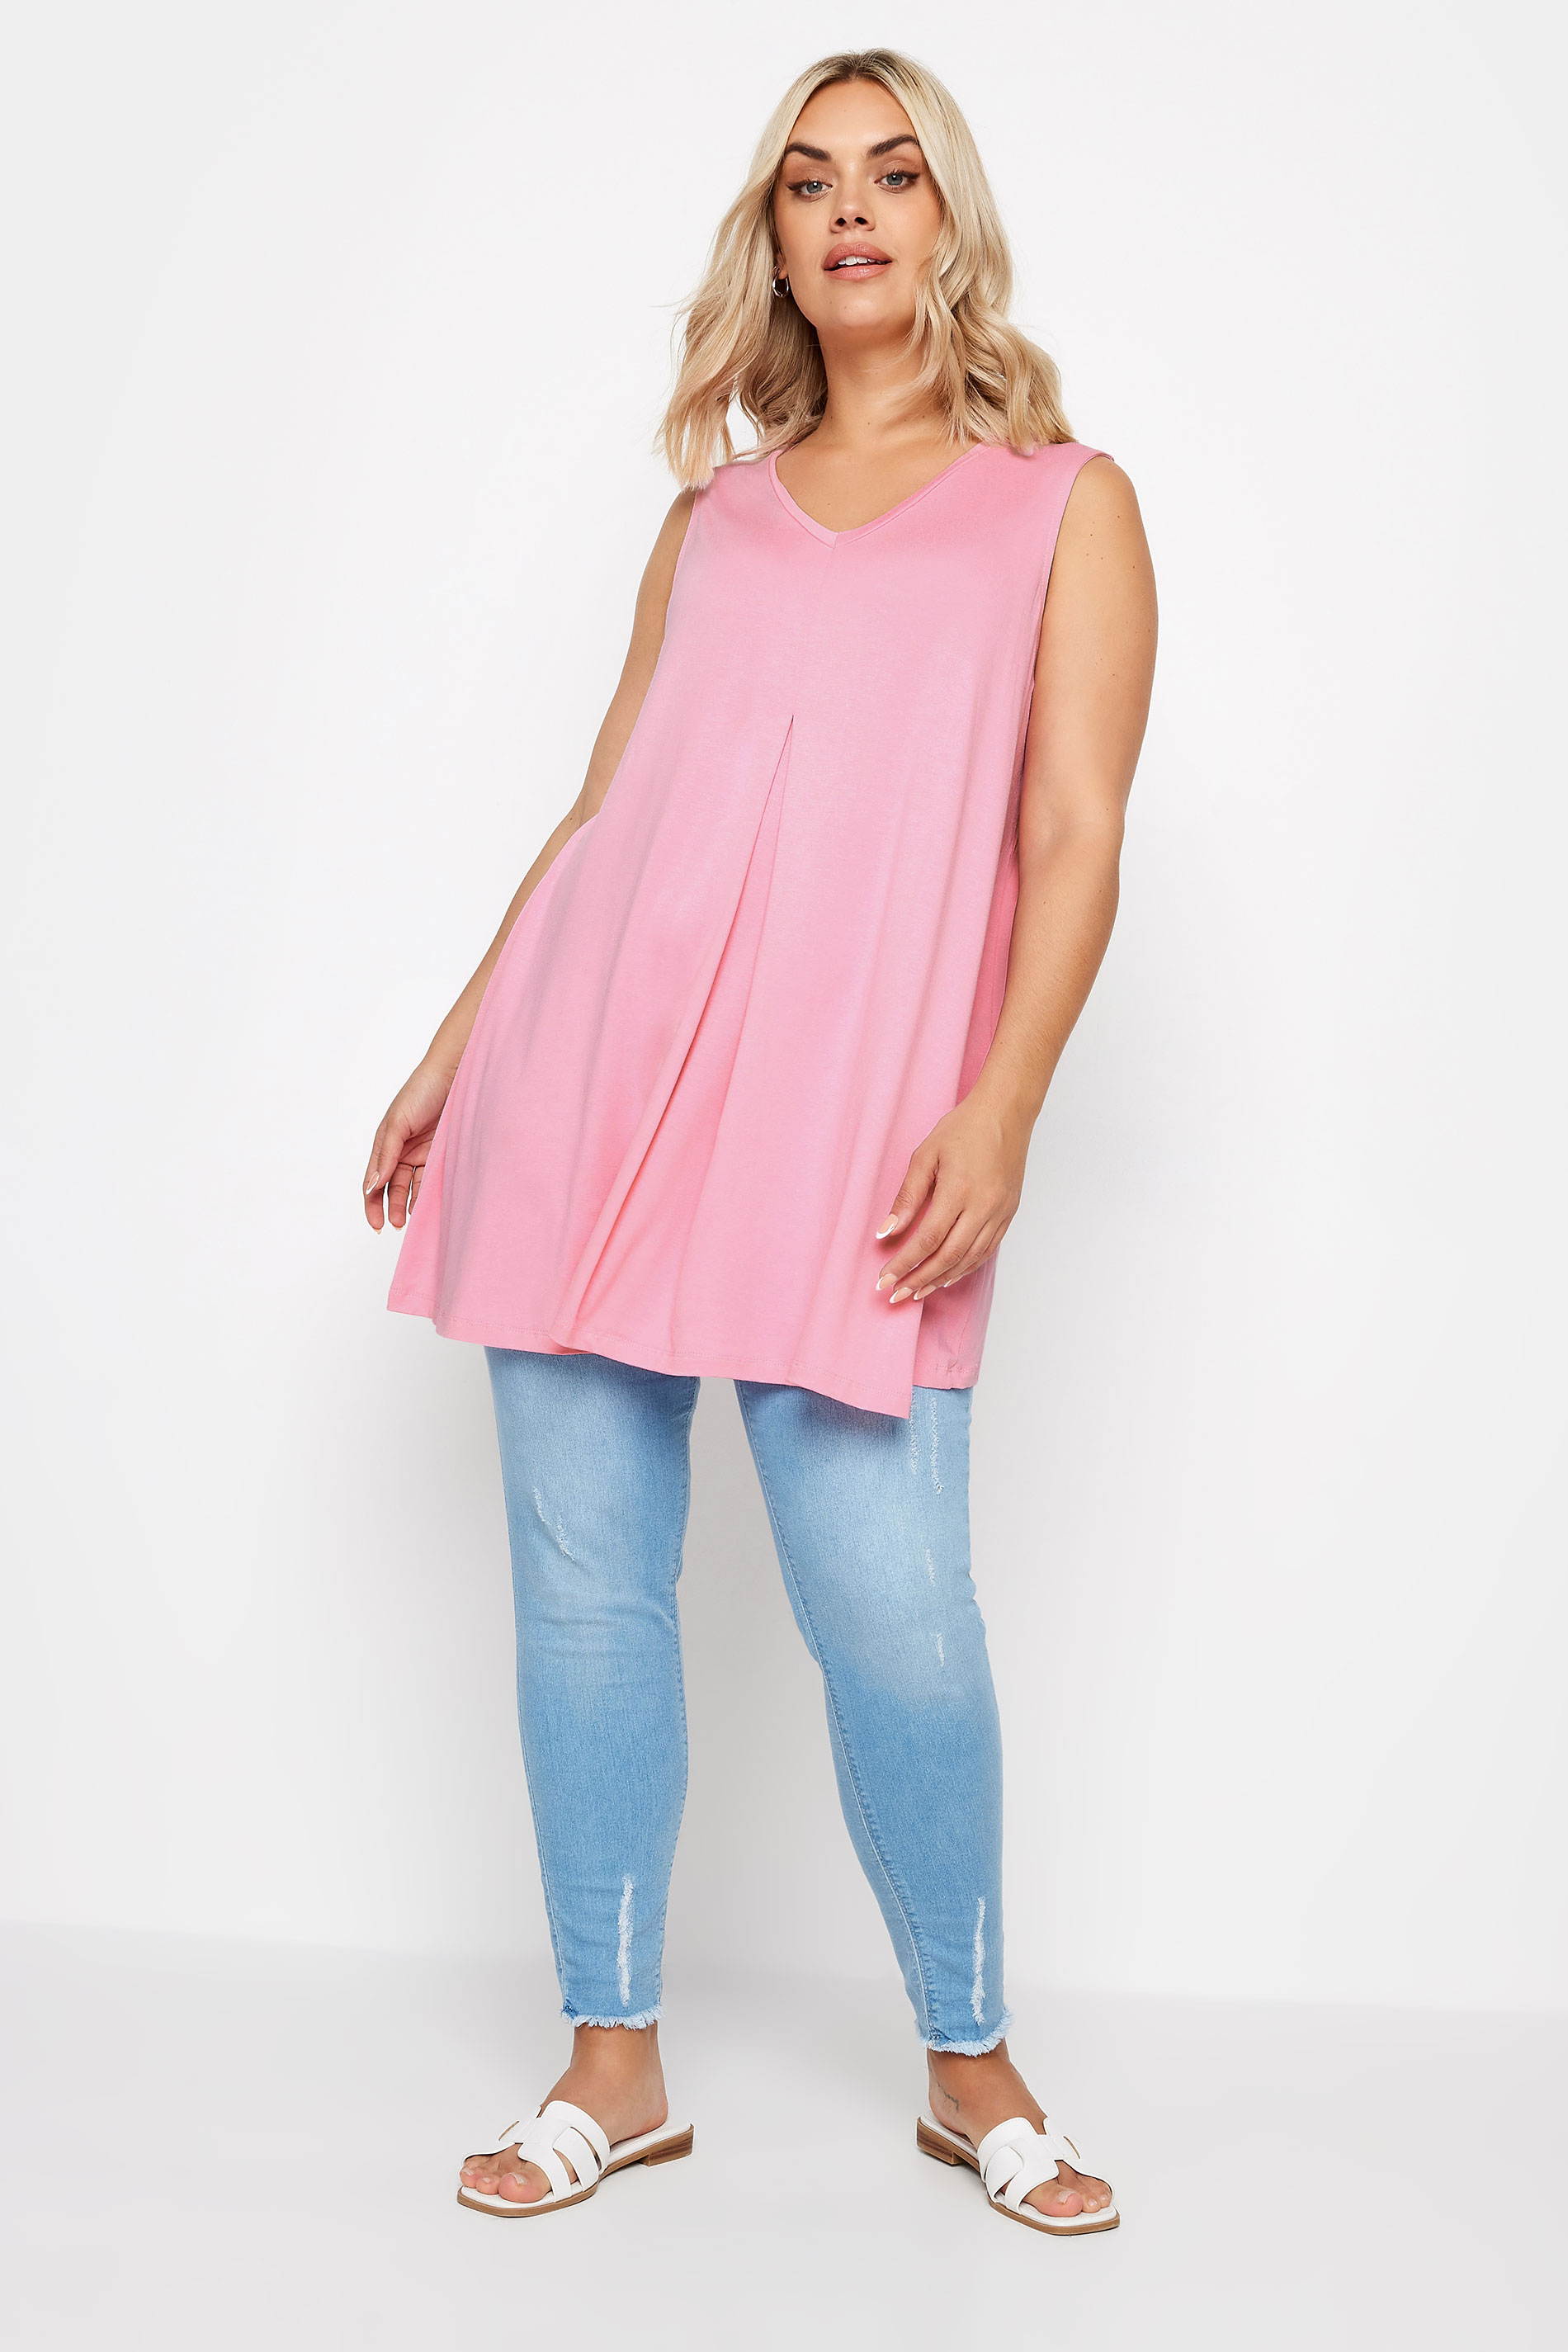 YOURS Plus Size Pink V-Neck Swing Vest Top | Yours Clothing 2